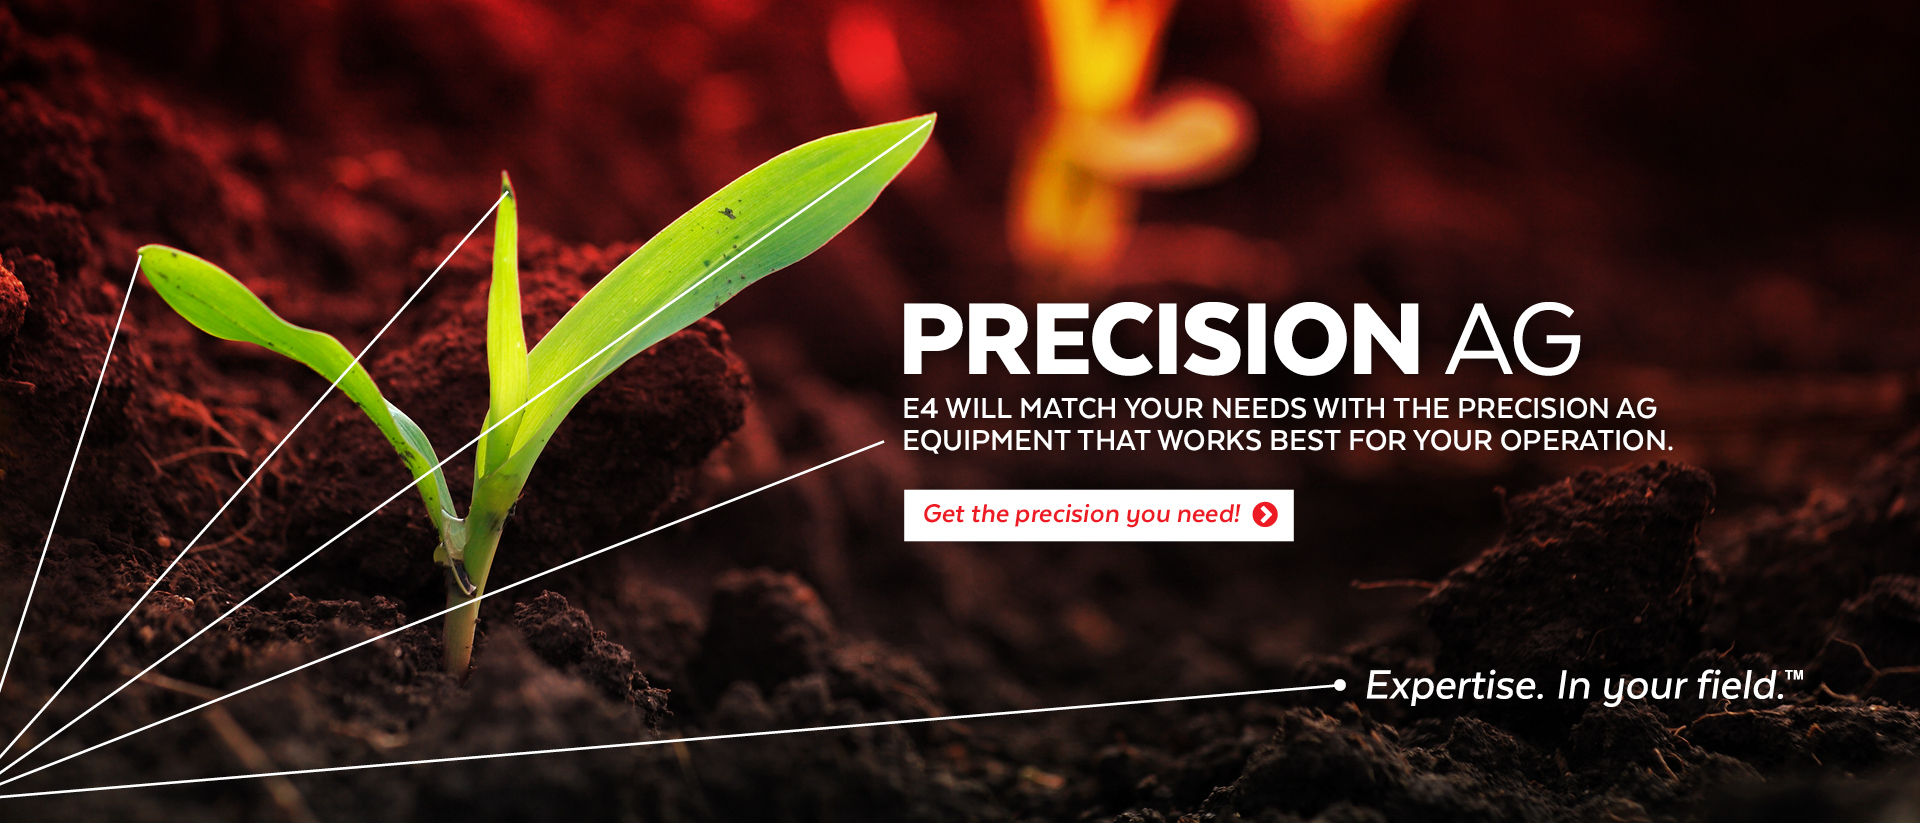 E4 helps with precision ag equipment recommendations and installation